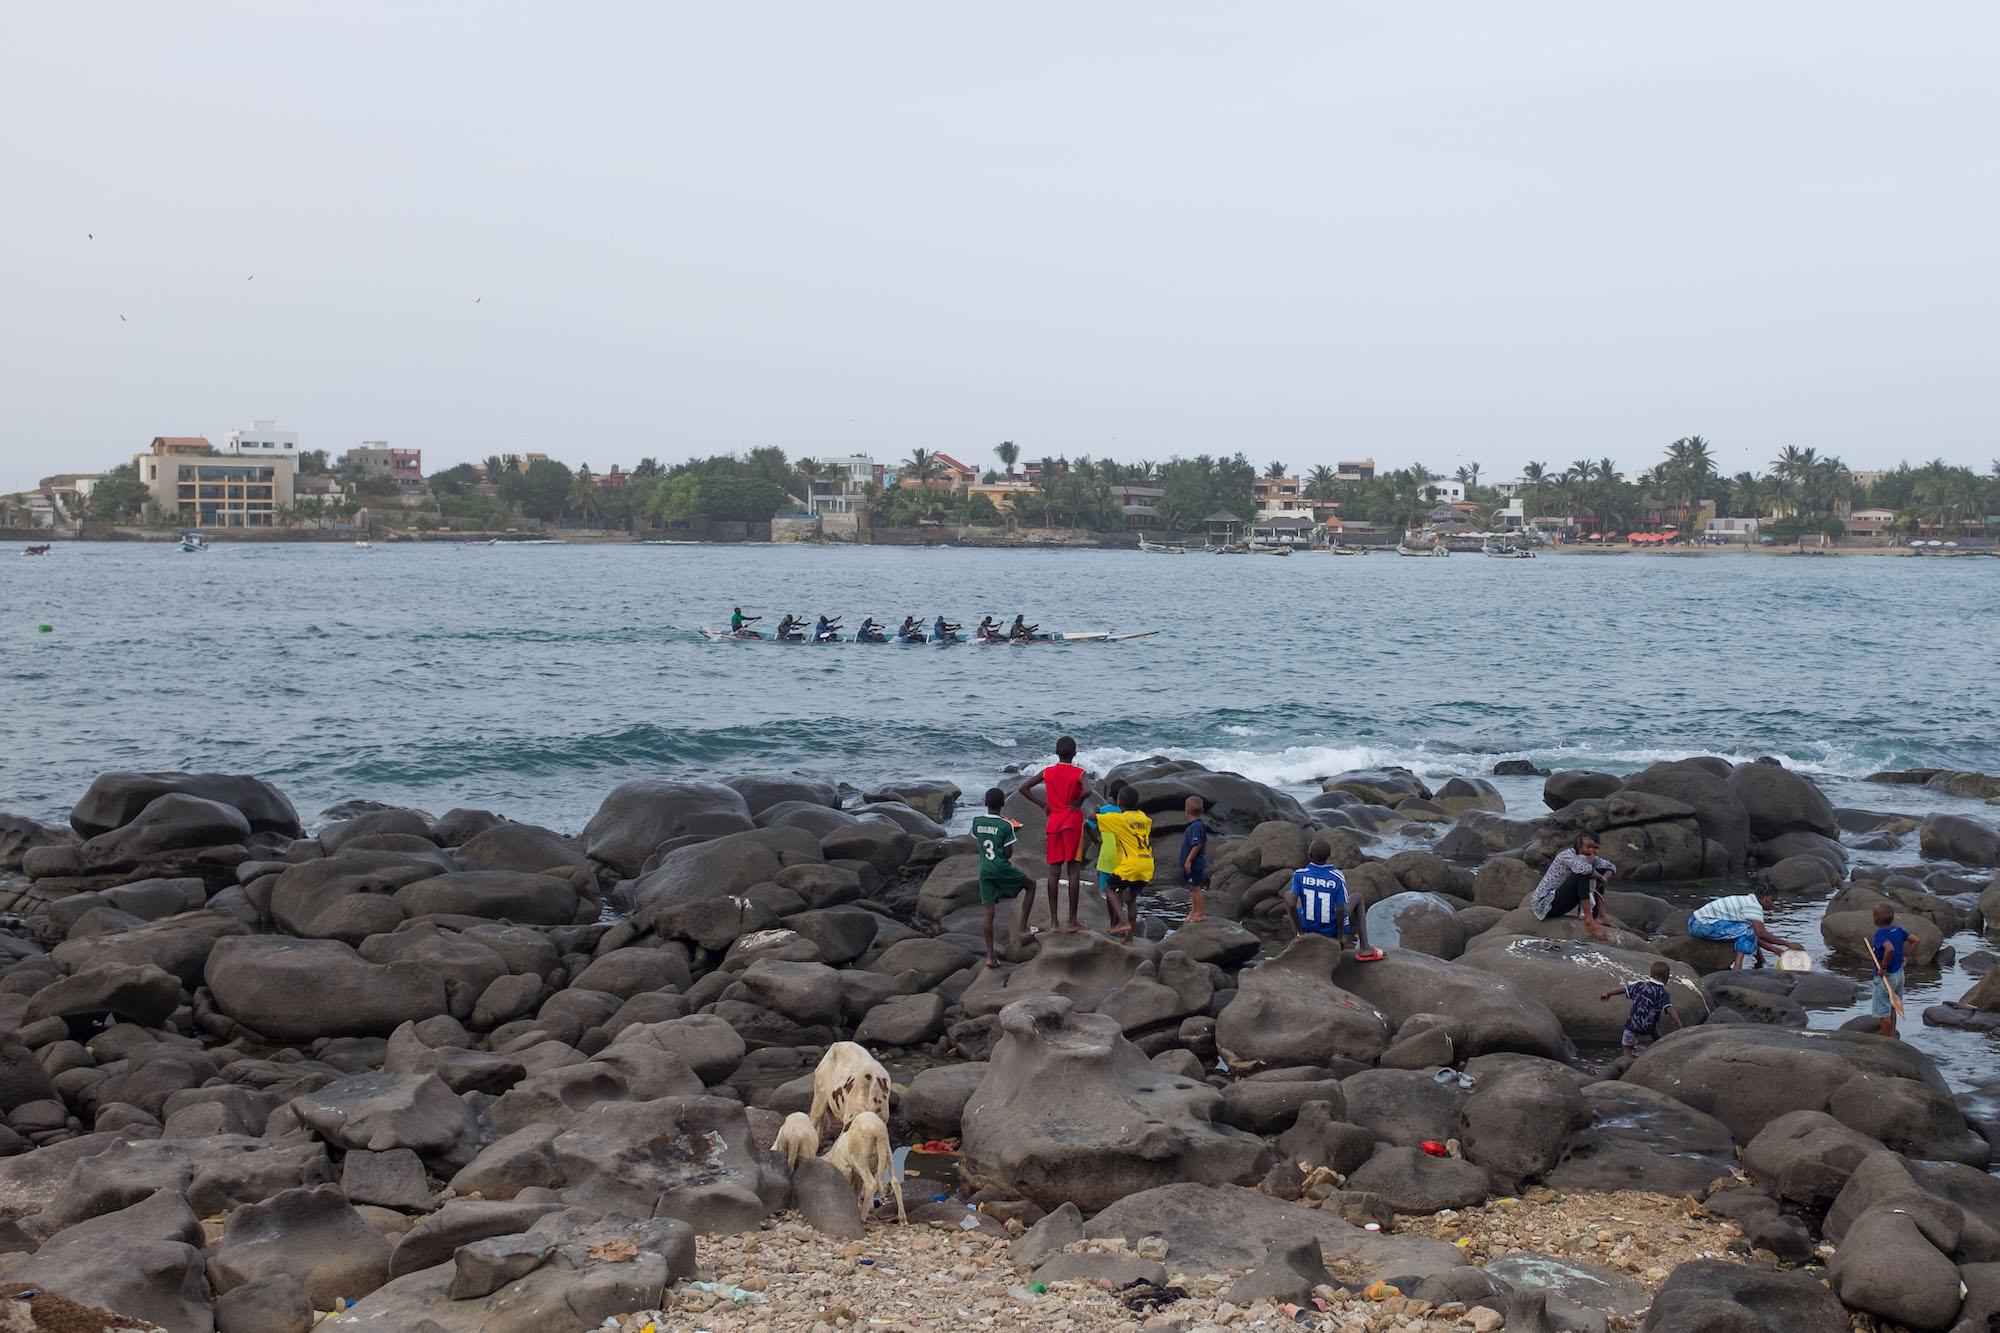 // The perfect stroke - The children of Ngor watch as the village's rowing...